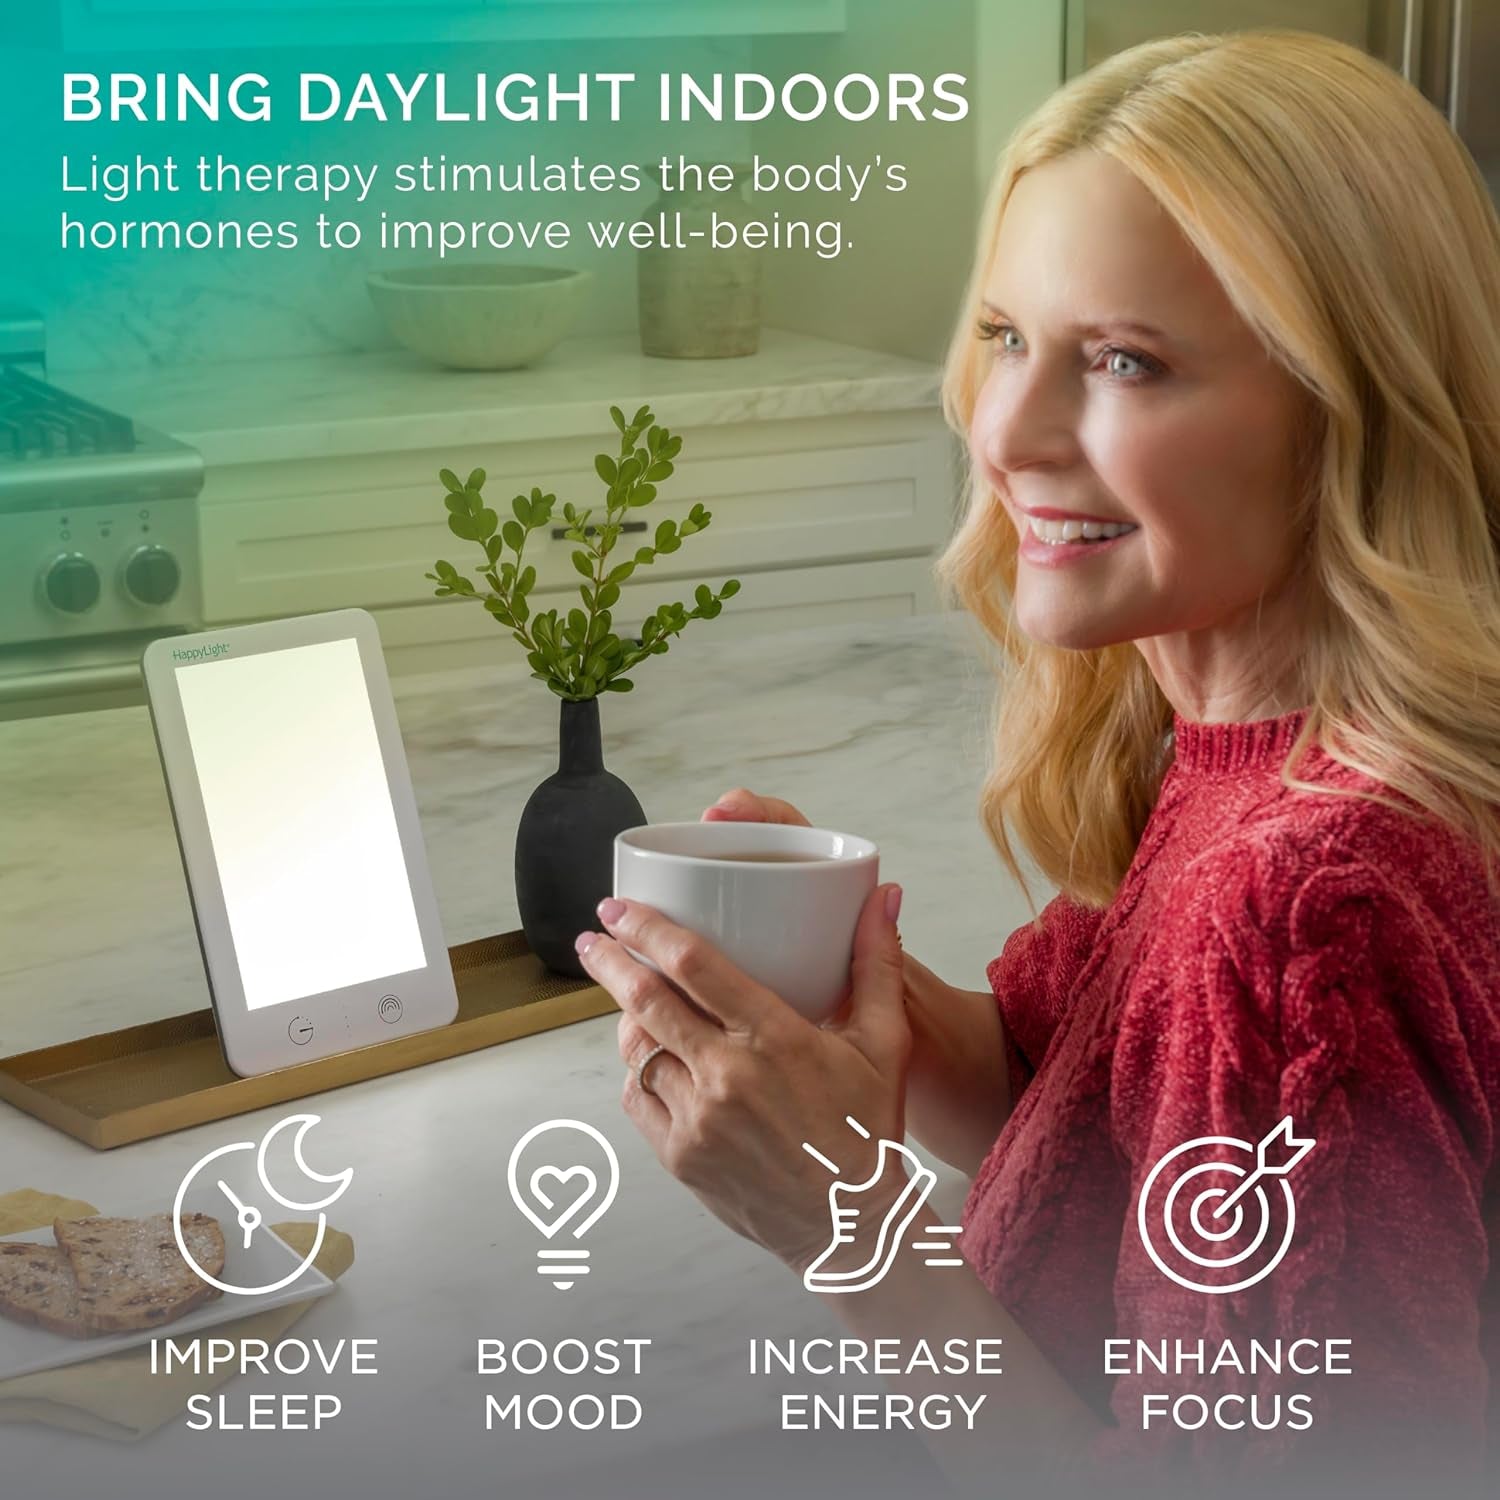 Happylight® Lumi plus - Light Therapy Lamp with 10,000 Lux, Uv-Free, LED Bright White Light with Adjustable Brightness, Countdown Timer, & Detachable Stand - Boost Mood, Sleep, and Focus